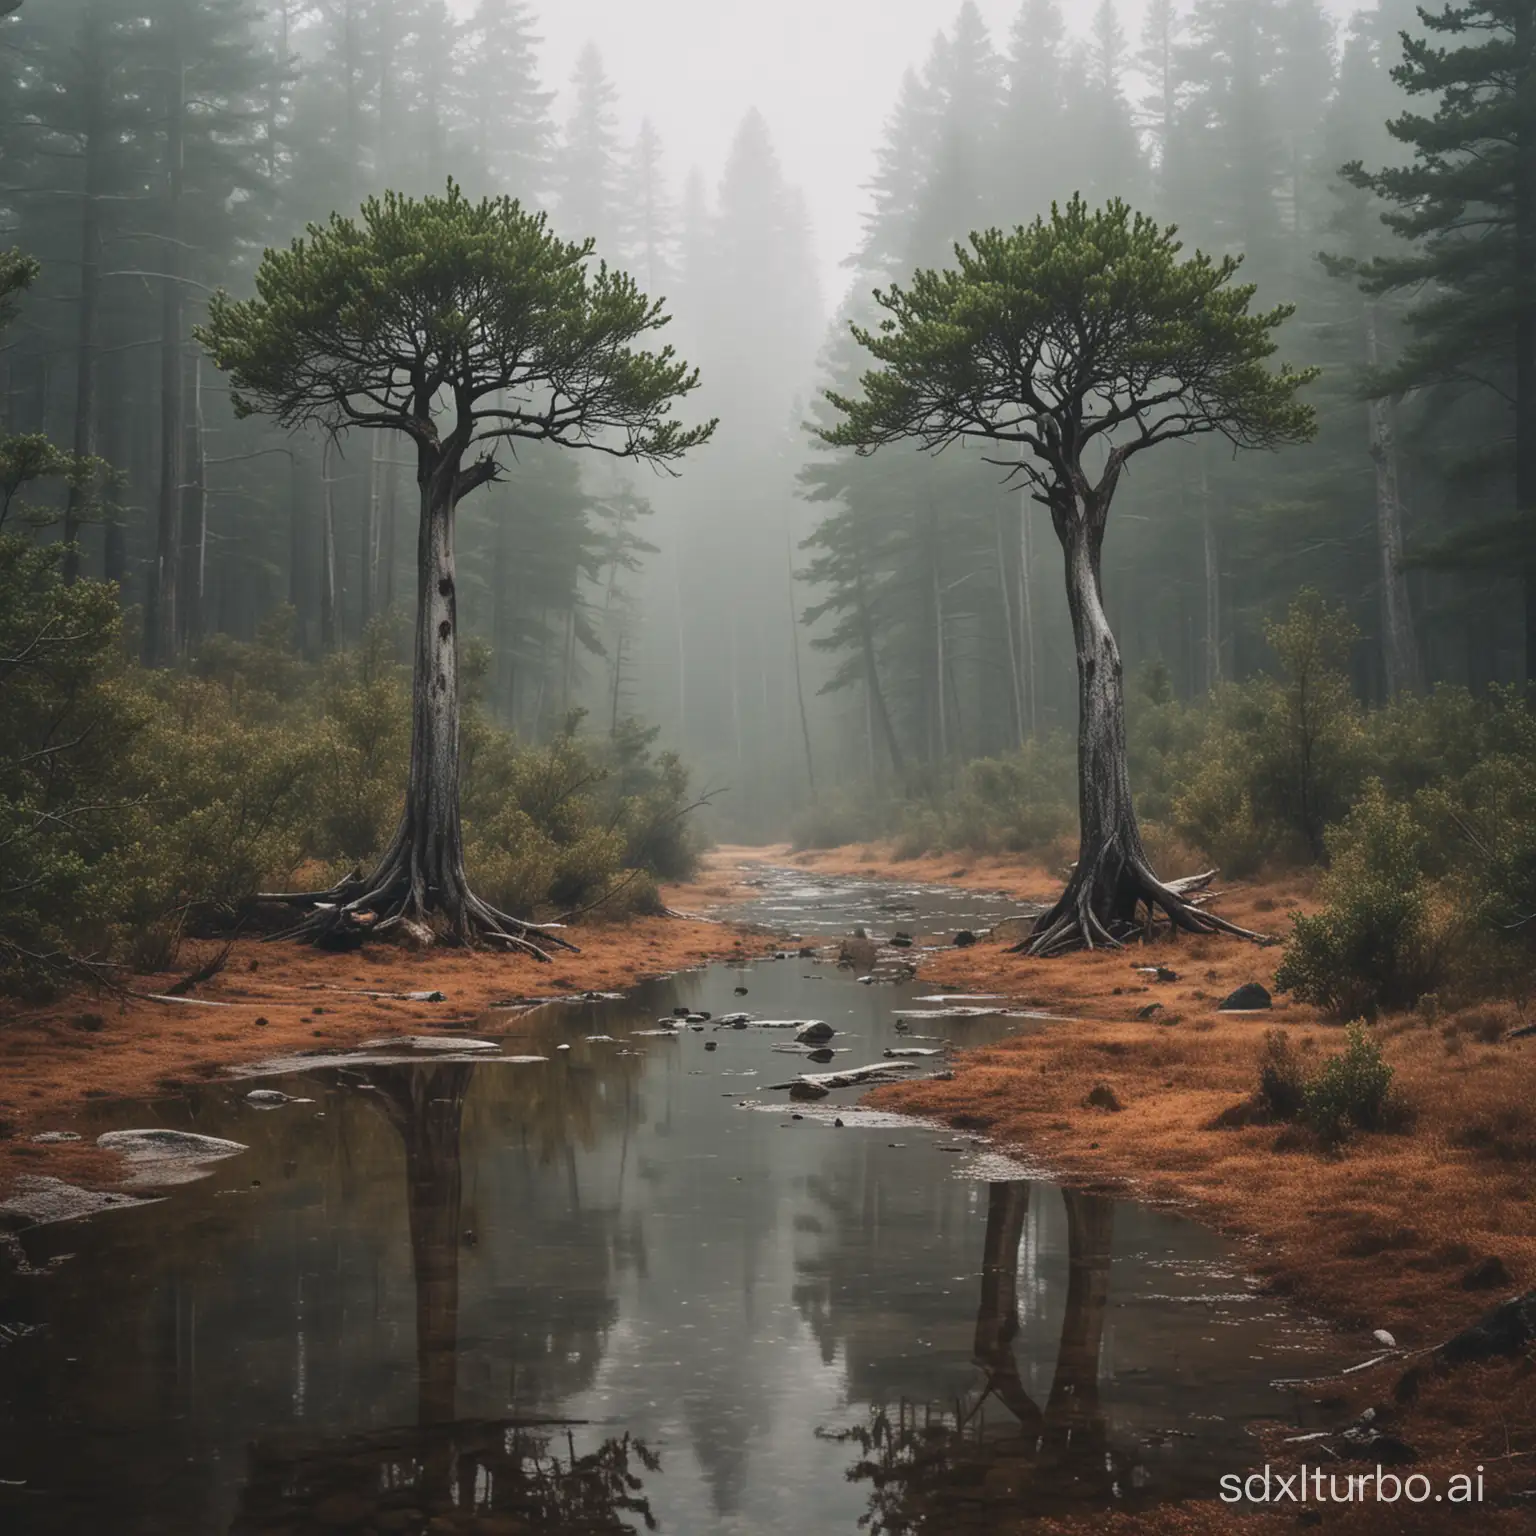 Twin trees in the wilderness